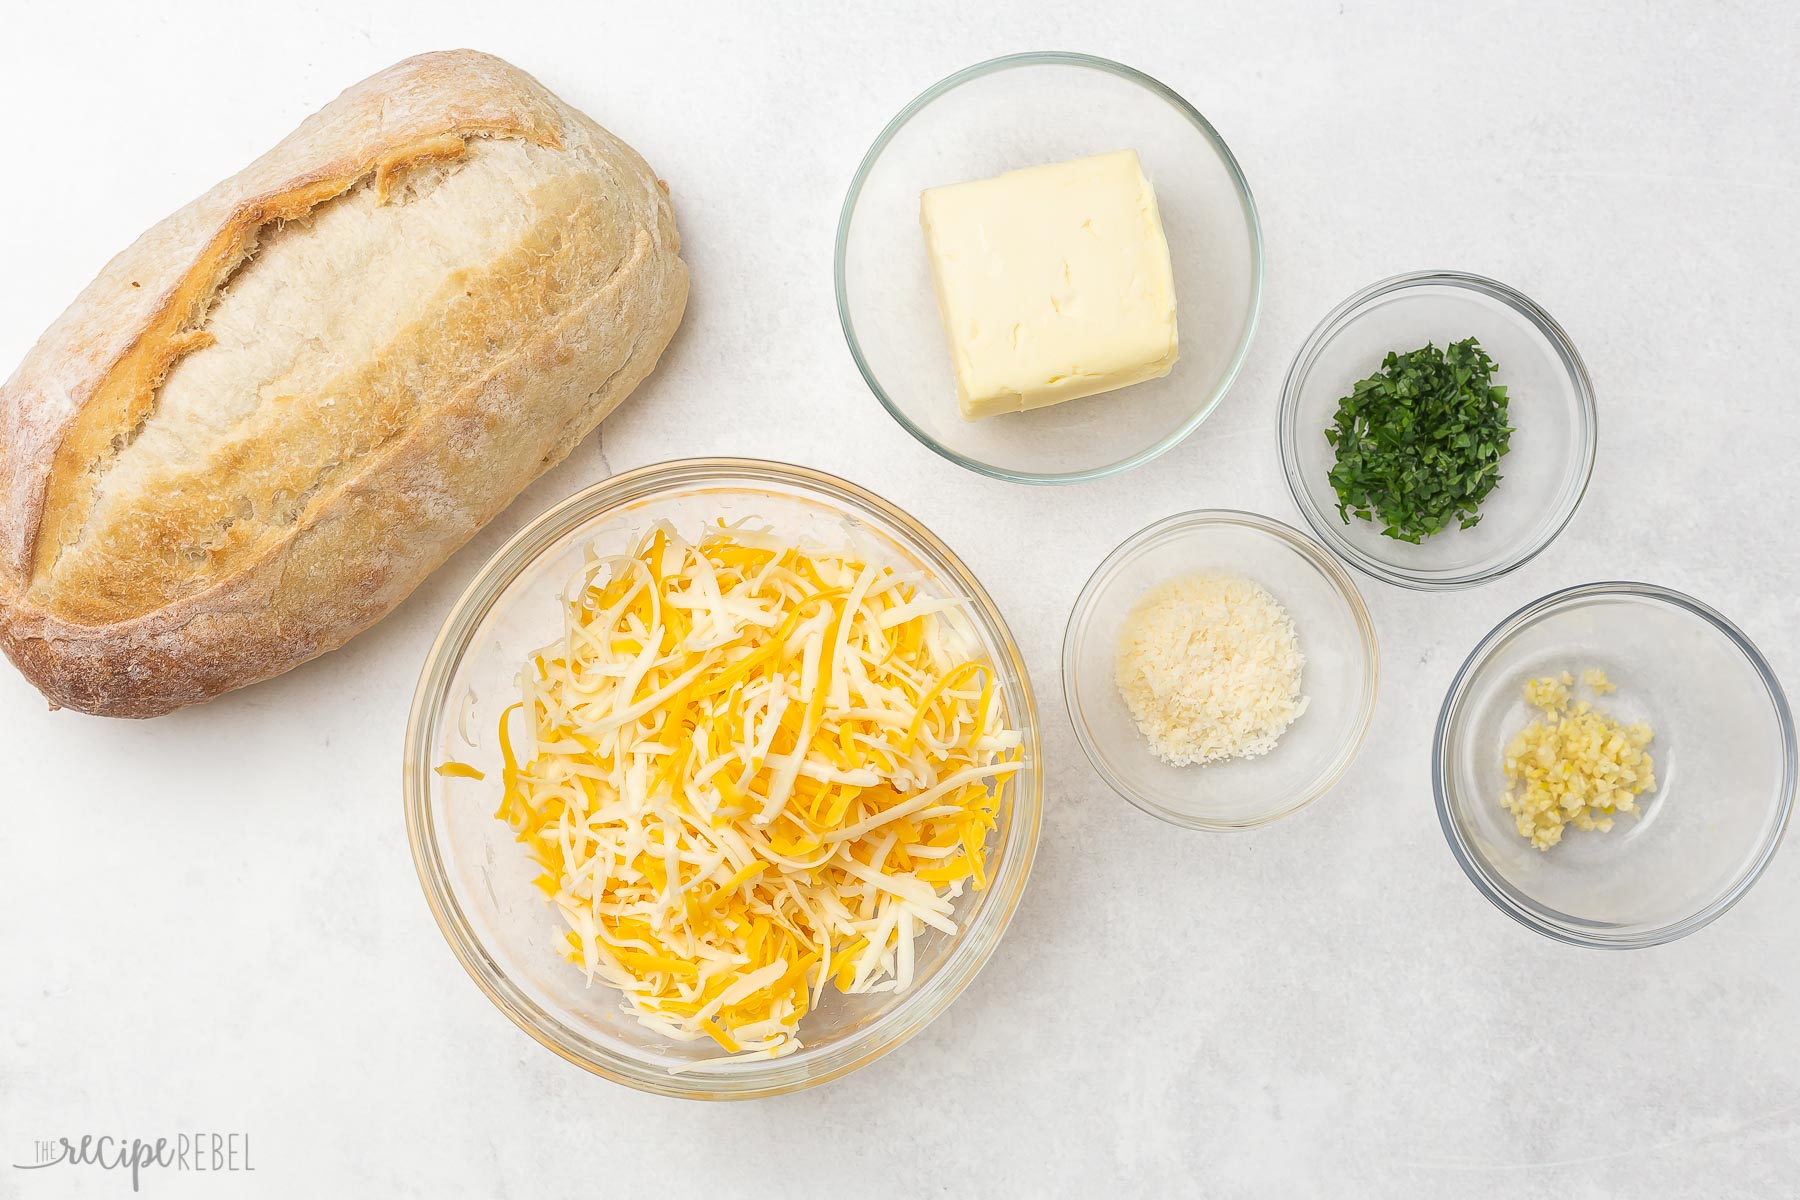 Top view of cheesy garlic bread ingredients in glass bowls on grey surface.